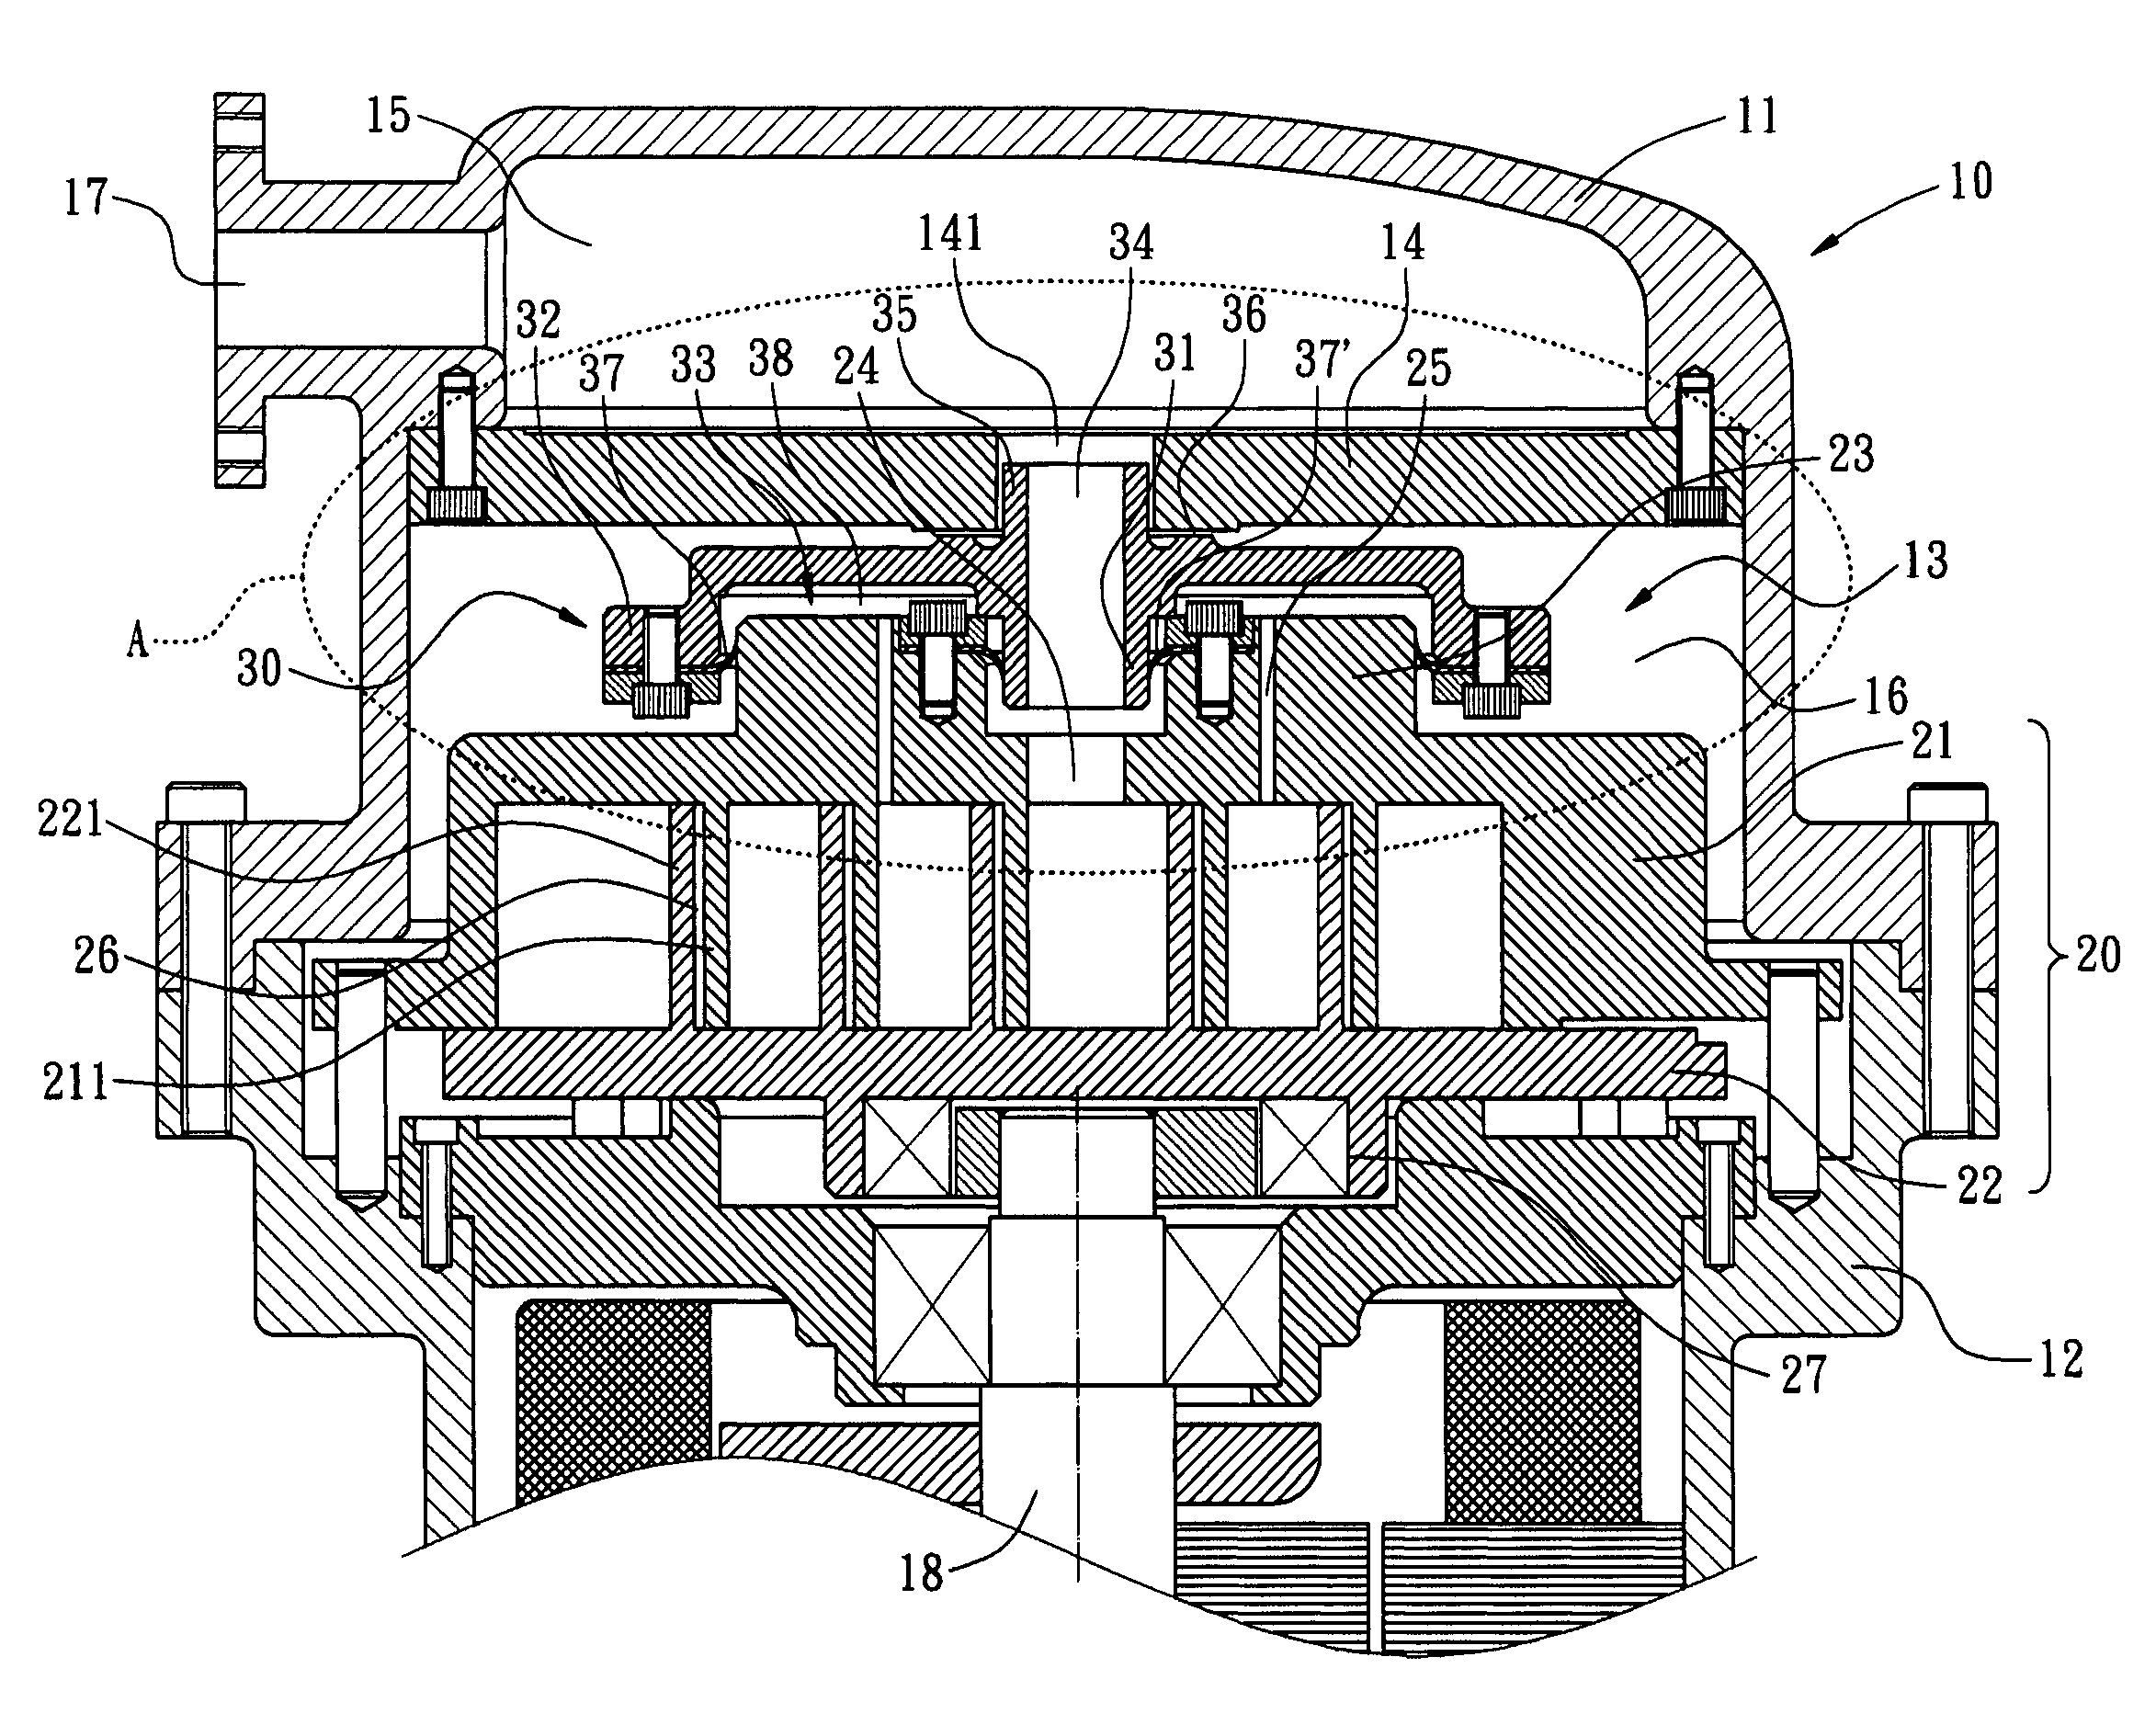 Axial sealing structure of scroll compressor